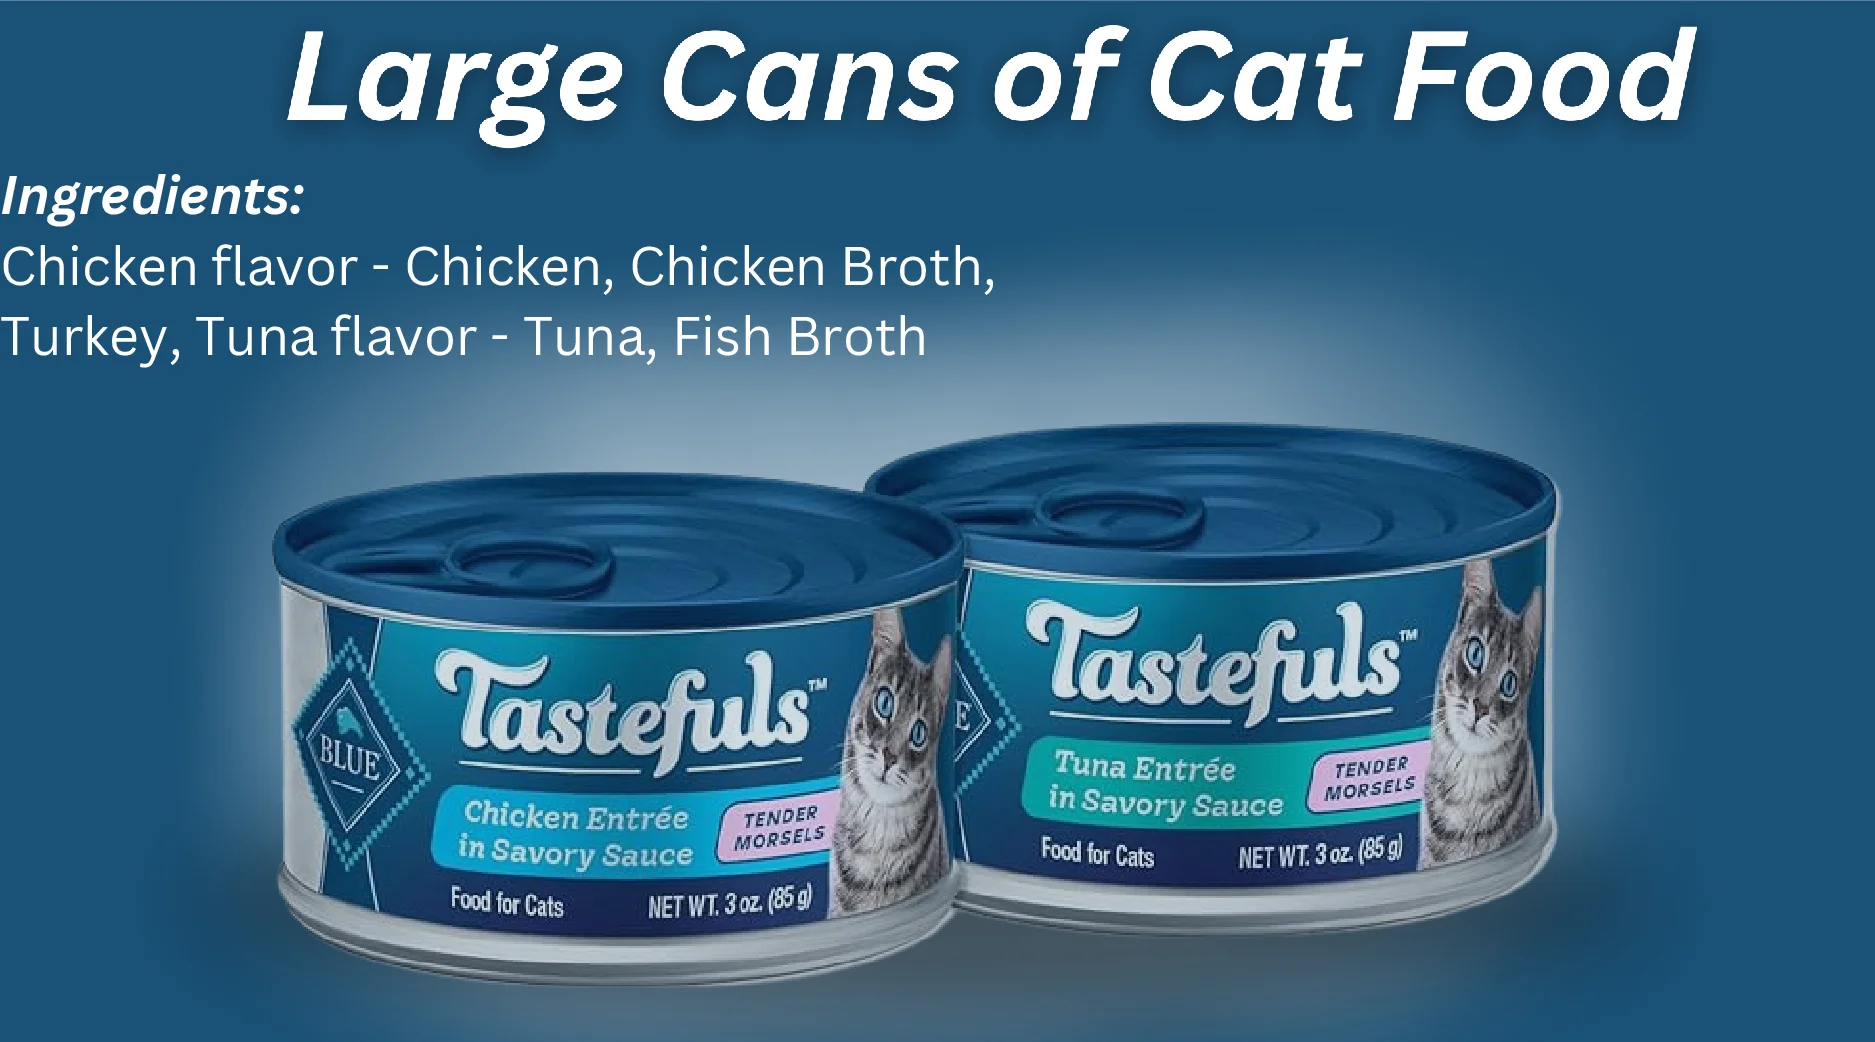 Large Cans of Cat Food